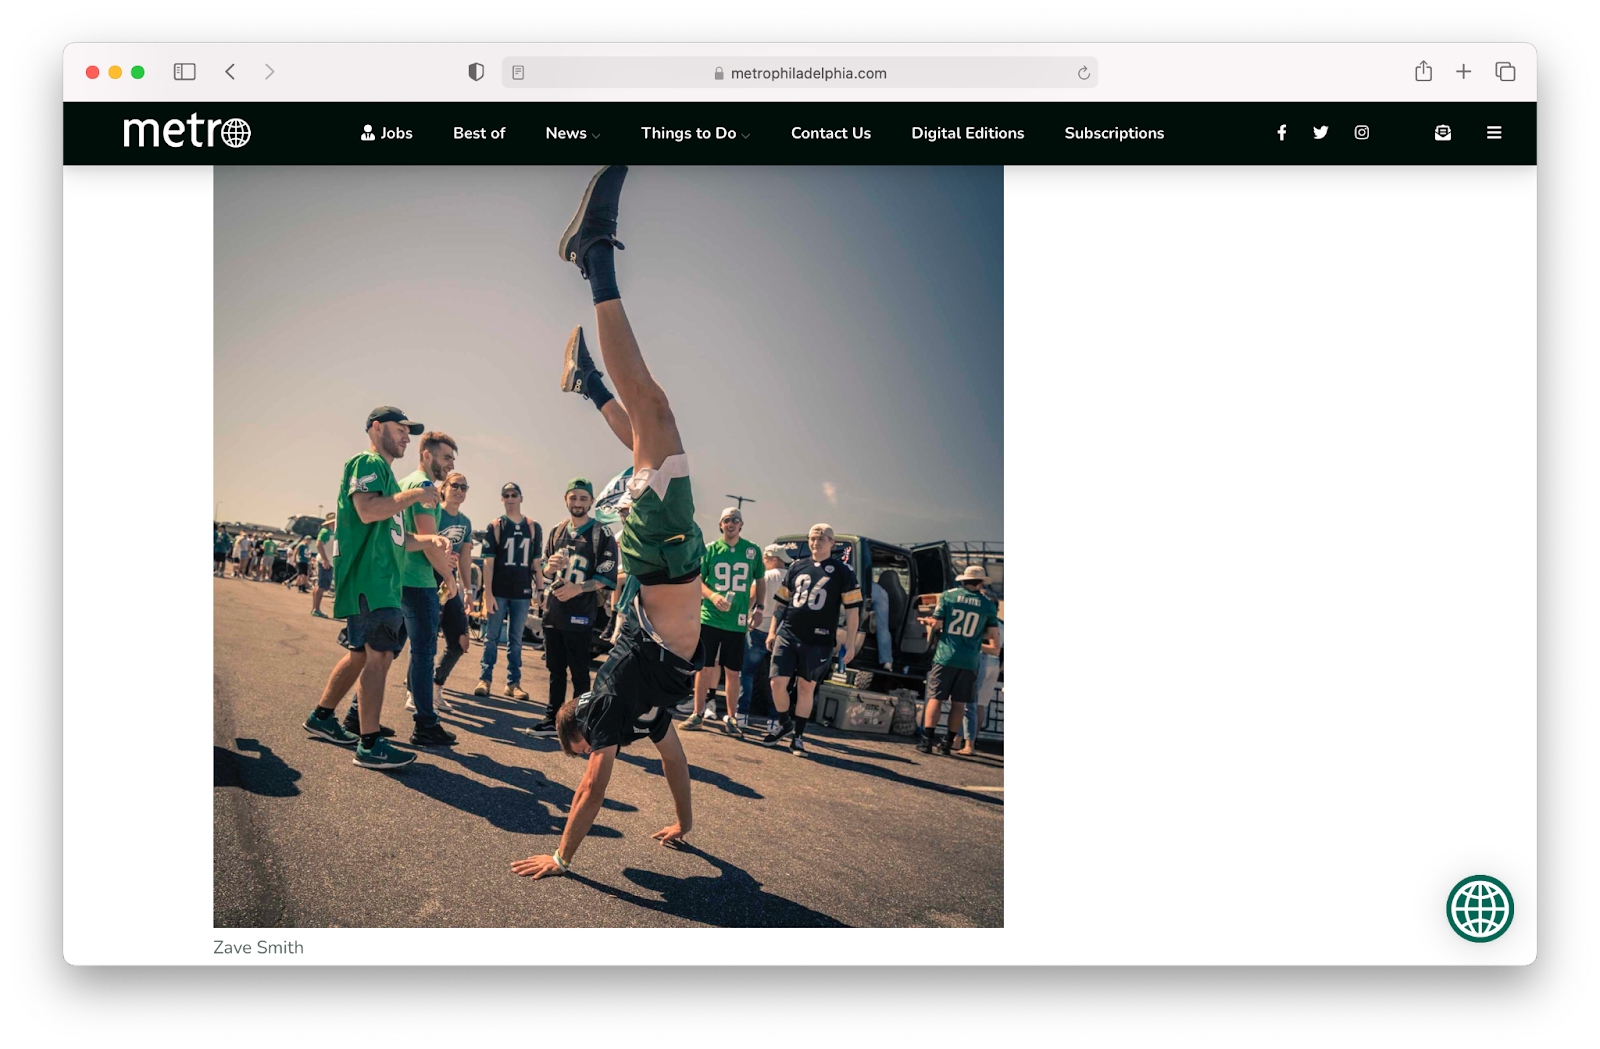 Another screenshot of the article that features Zave Smith's social documentary photo series - this one shows a fan doing a handstand while others cheer him on.